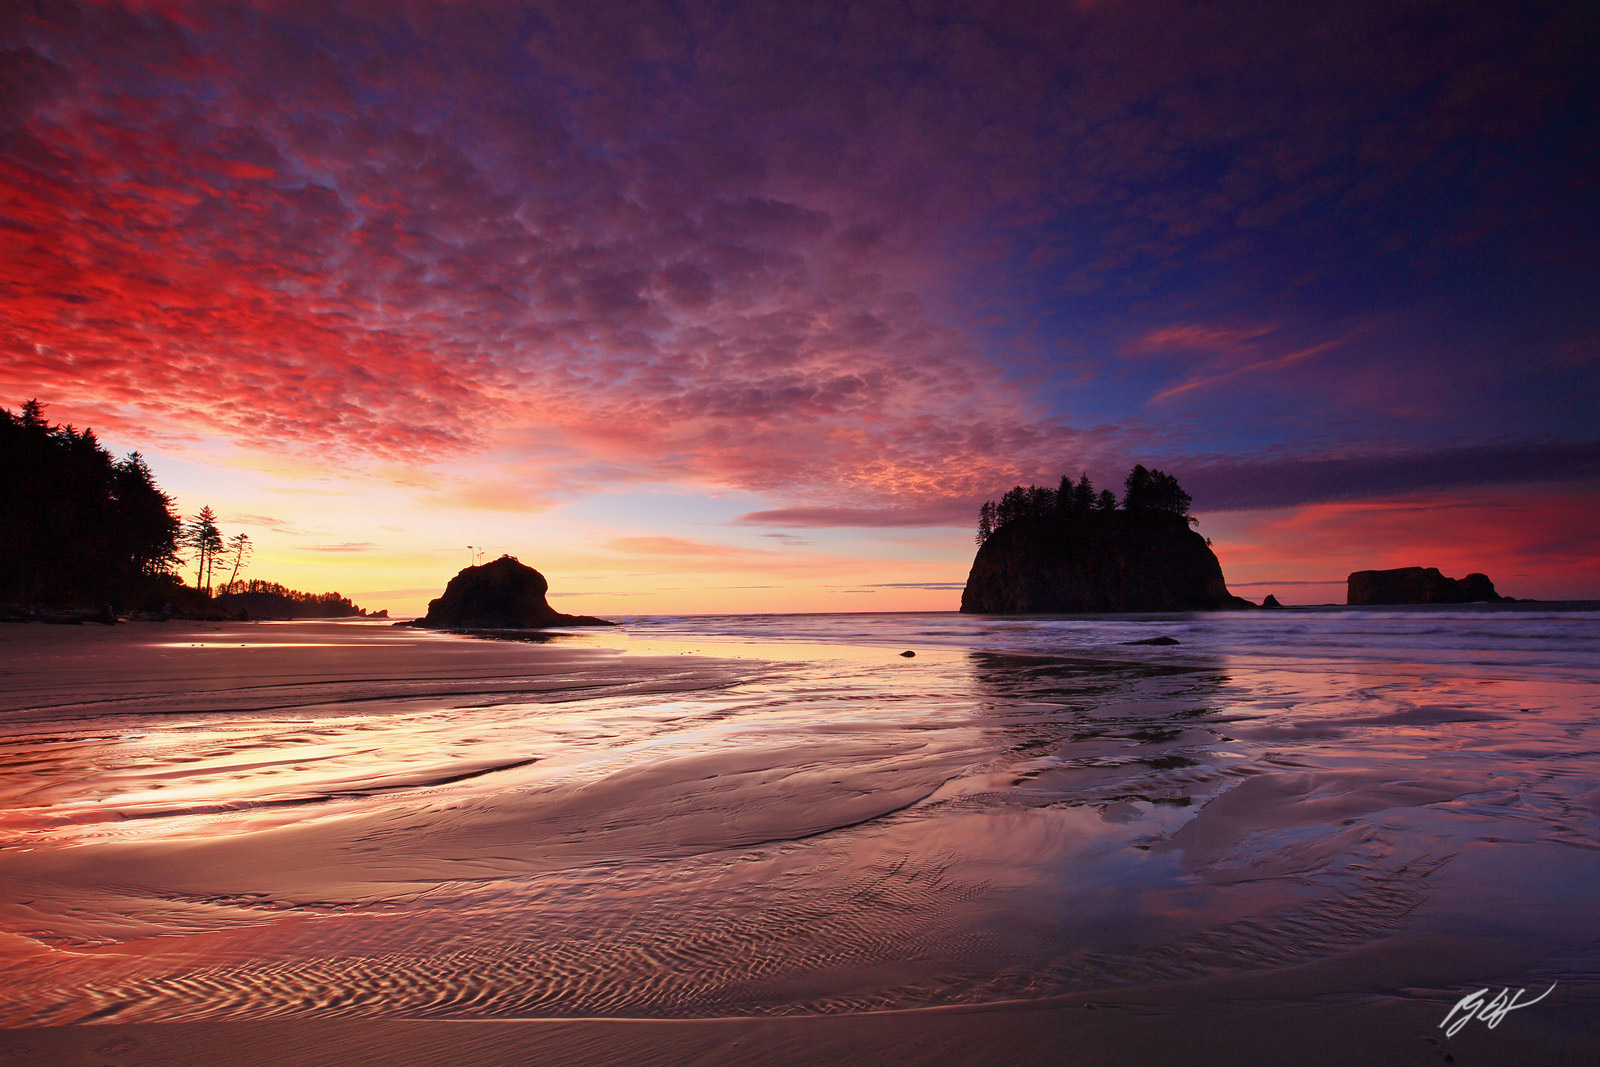 Sunrise and Sea Stacks with a Creek on Second Beach in Olympic National Park in Washington